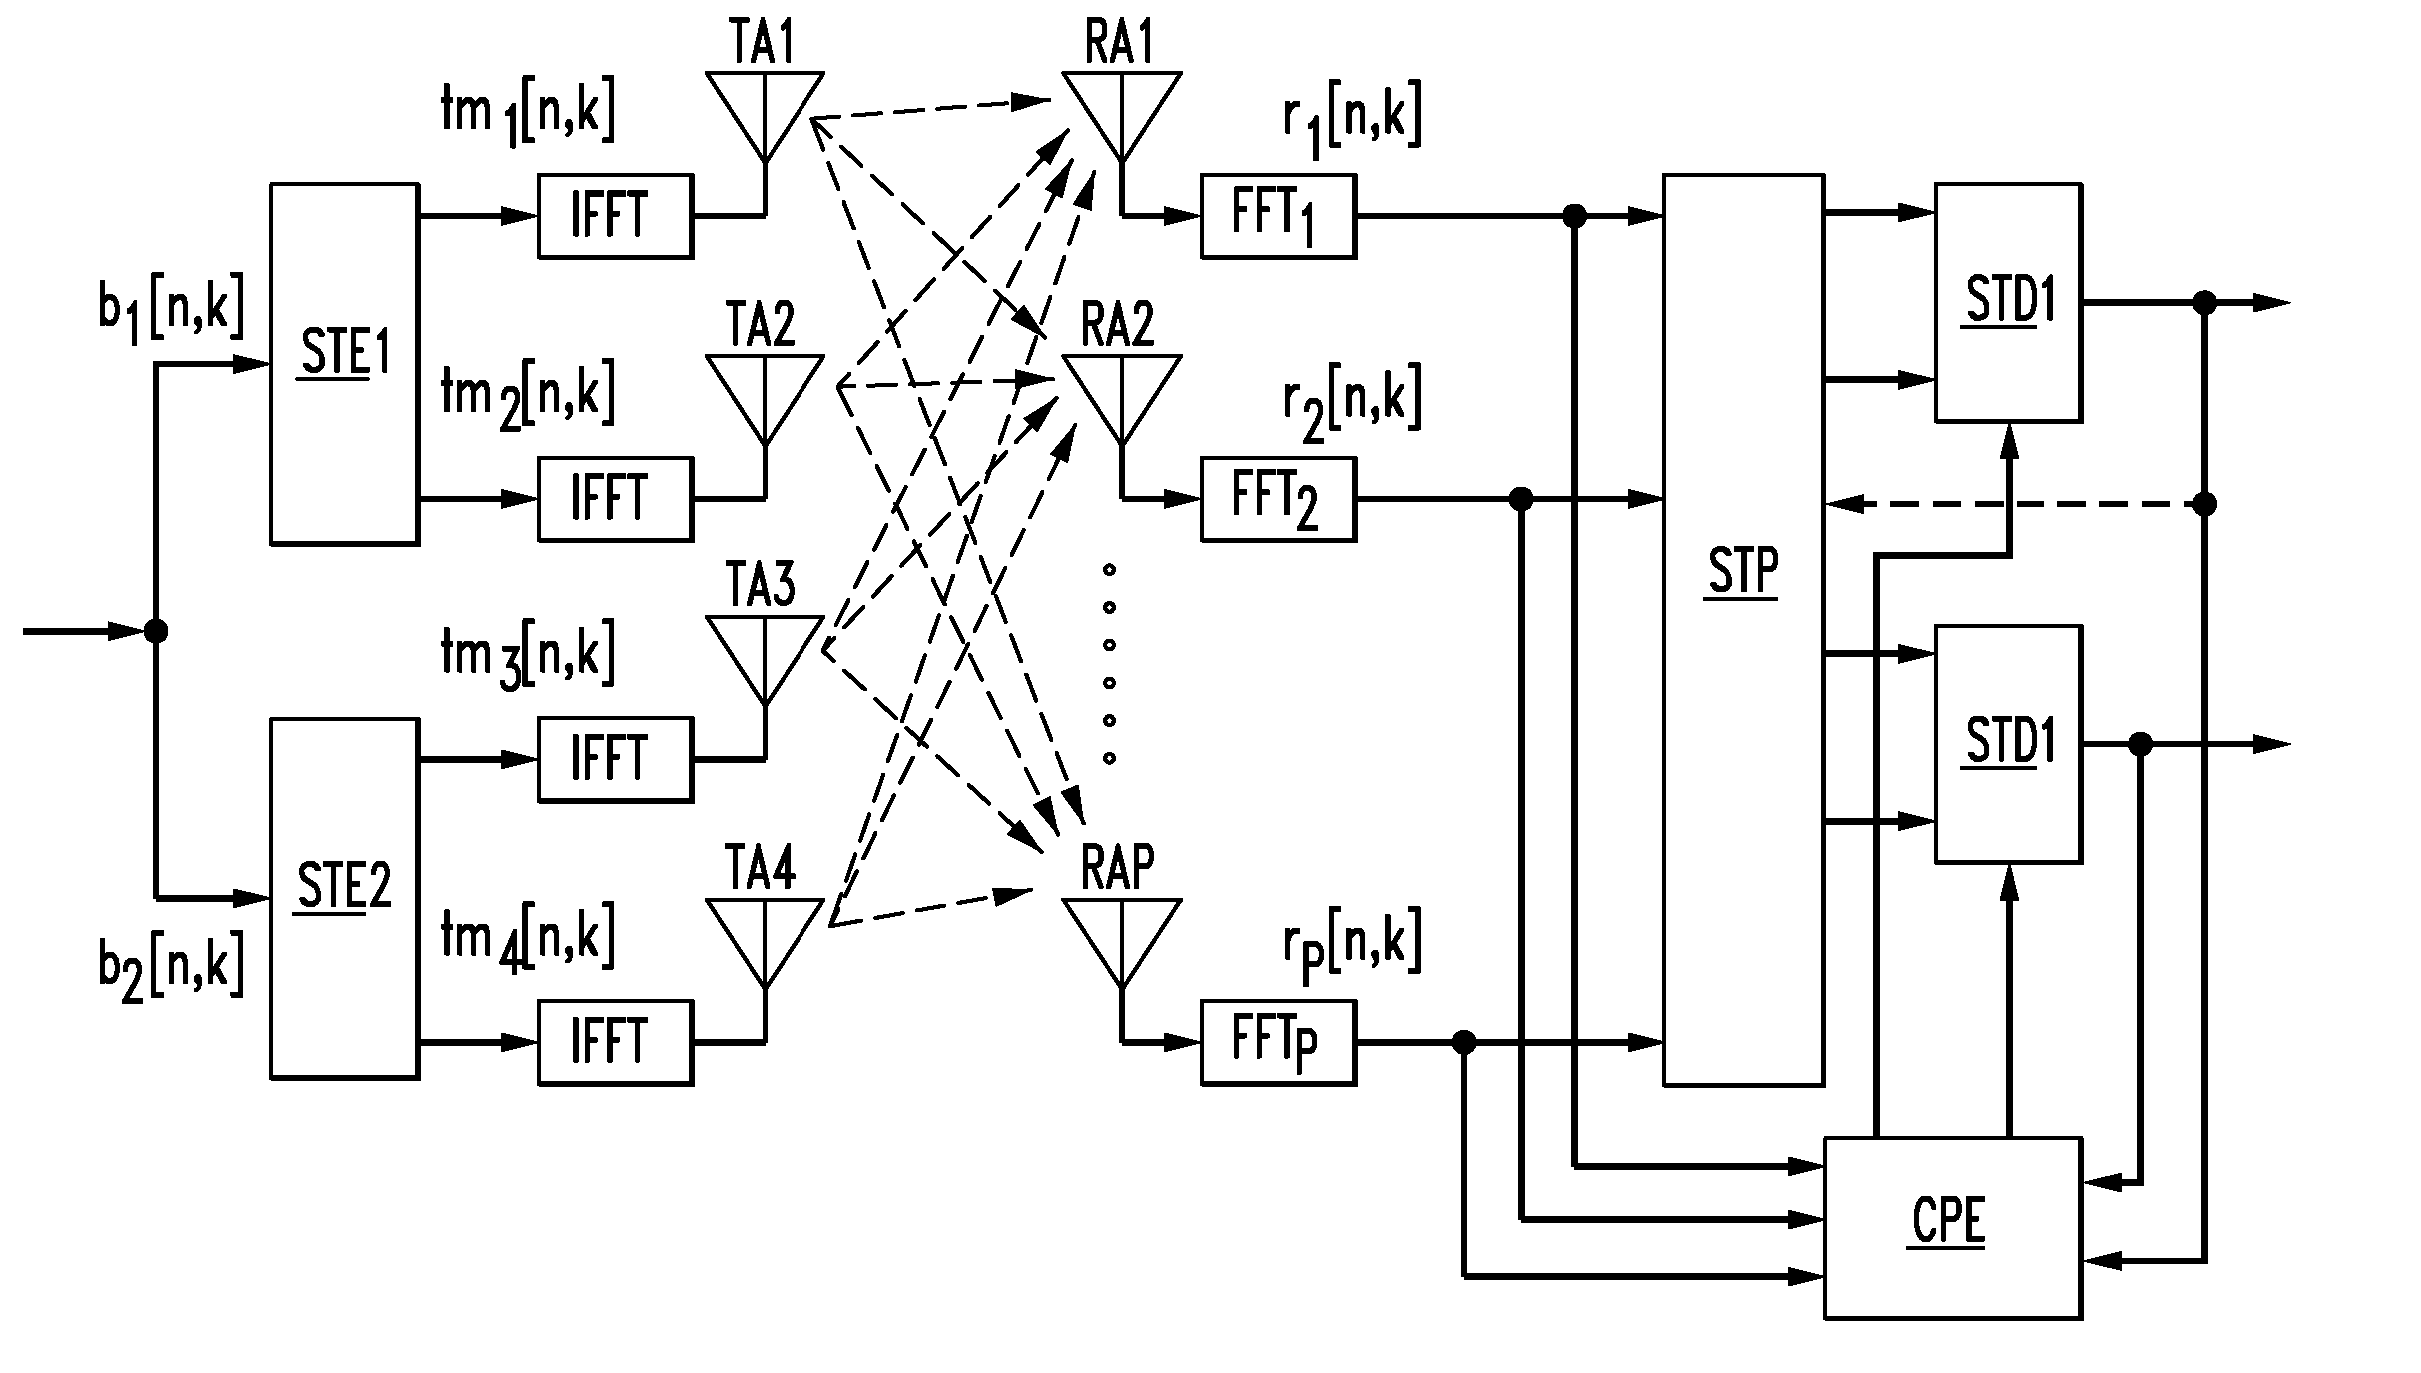 MIMO OFDM system